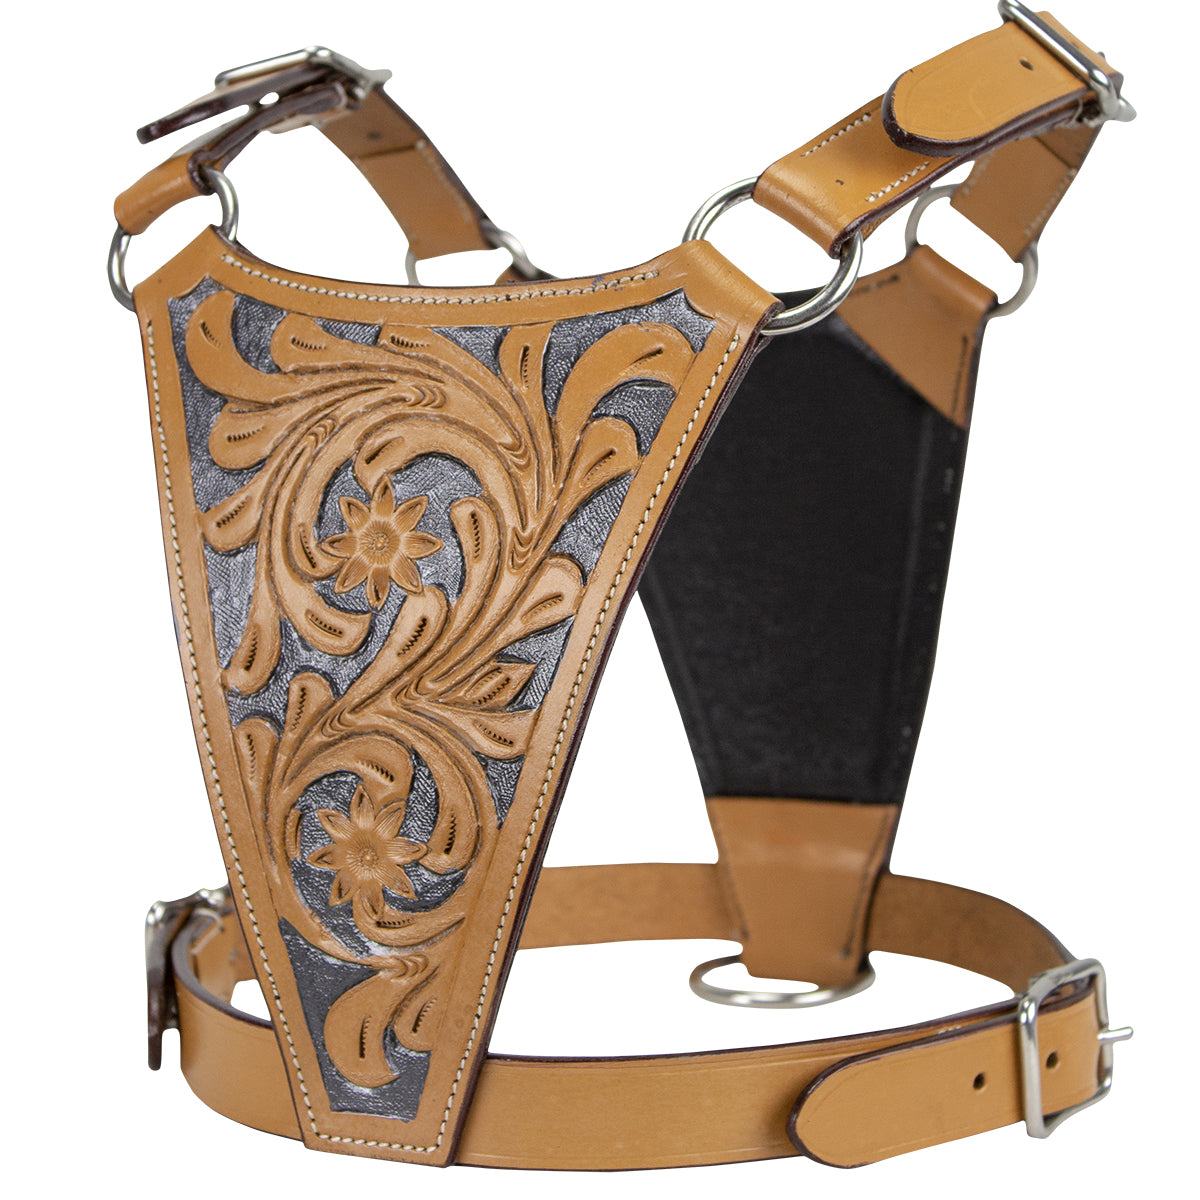 Buy Leather Dog Pulling Harness